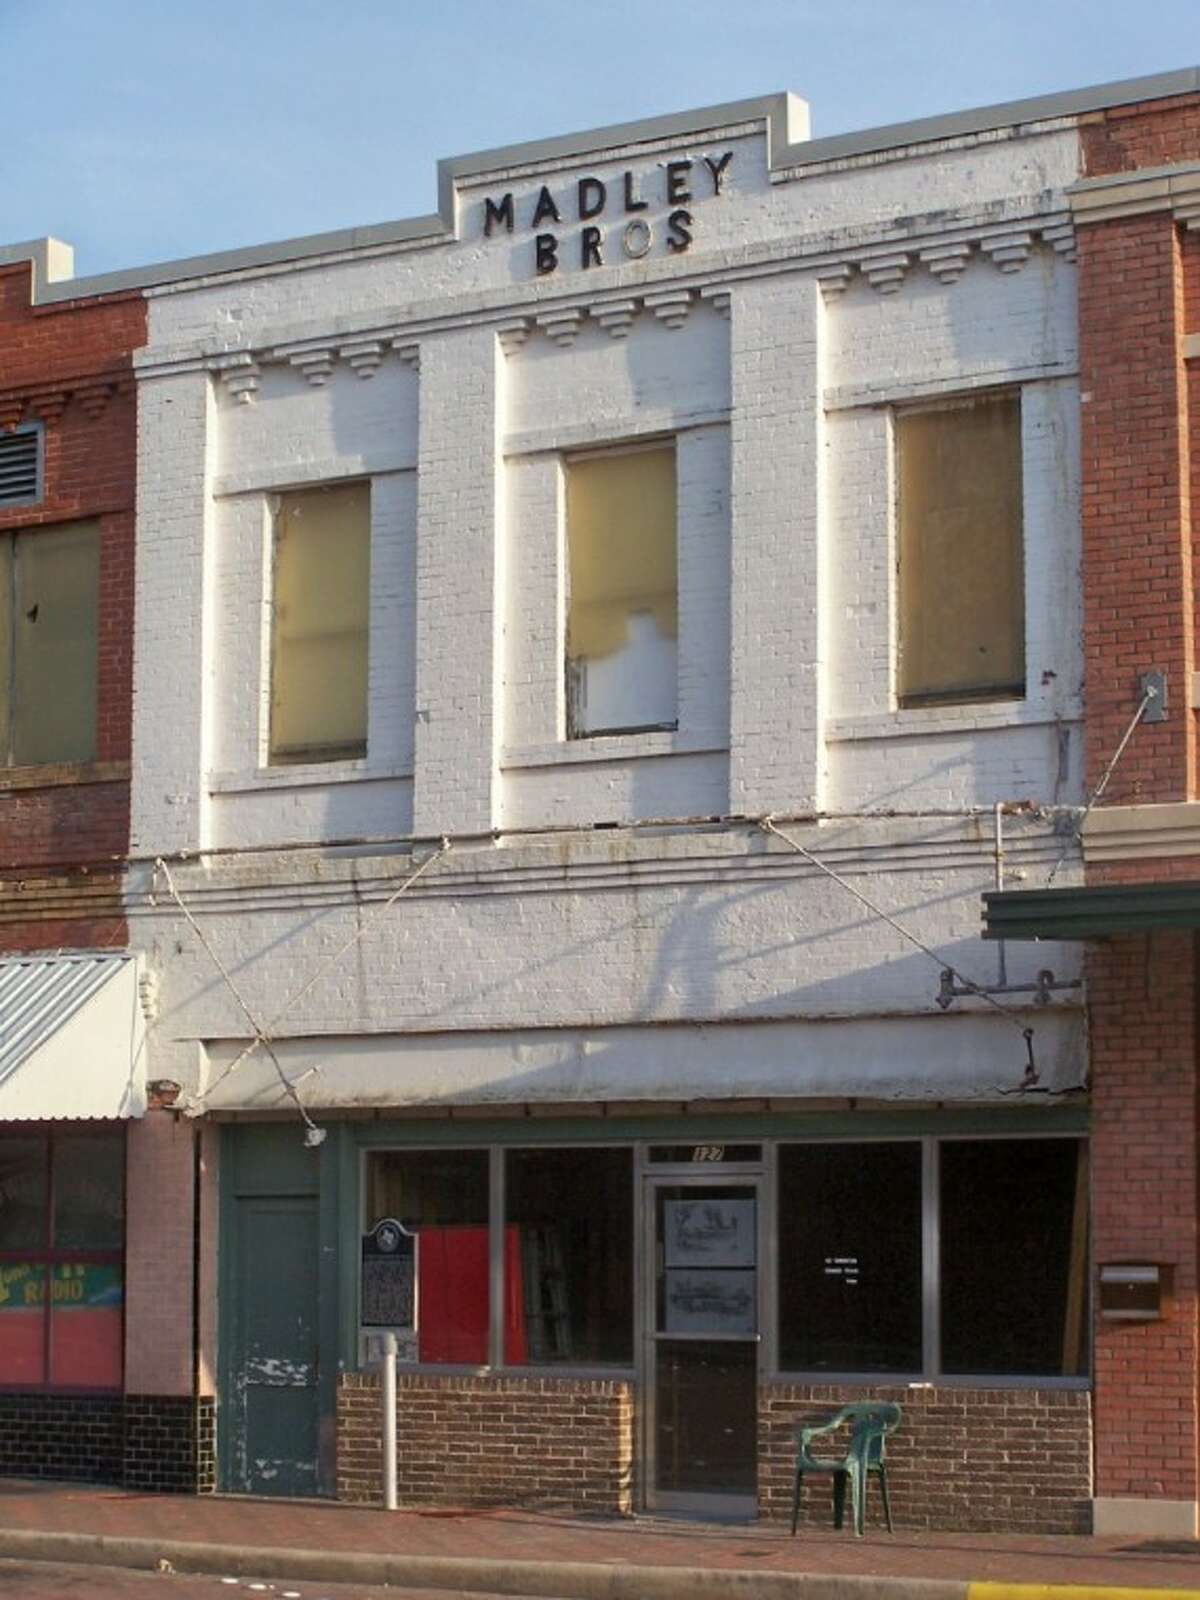 A photo of the Madeley Building prior to its renovation in 2010. The building housed many different businesses in its 100 years - including a meat market, dress shop, telephone exchange and others. Today it’s the home of the Conroe Art League’s Gallery at the Madeley Building. This photo was taken in 2006.